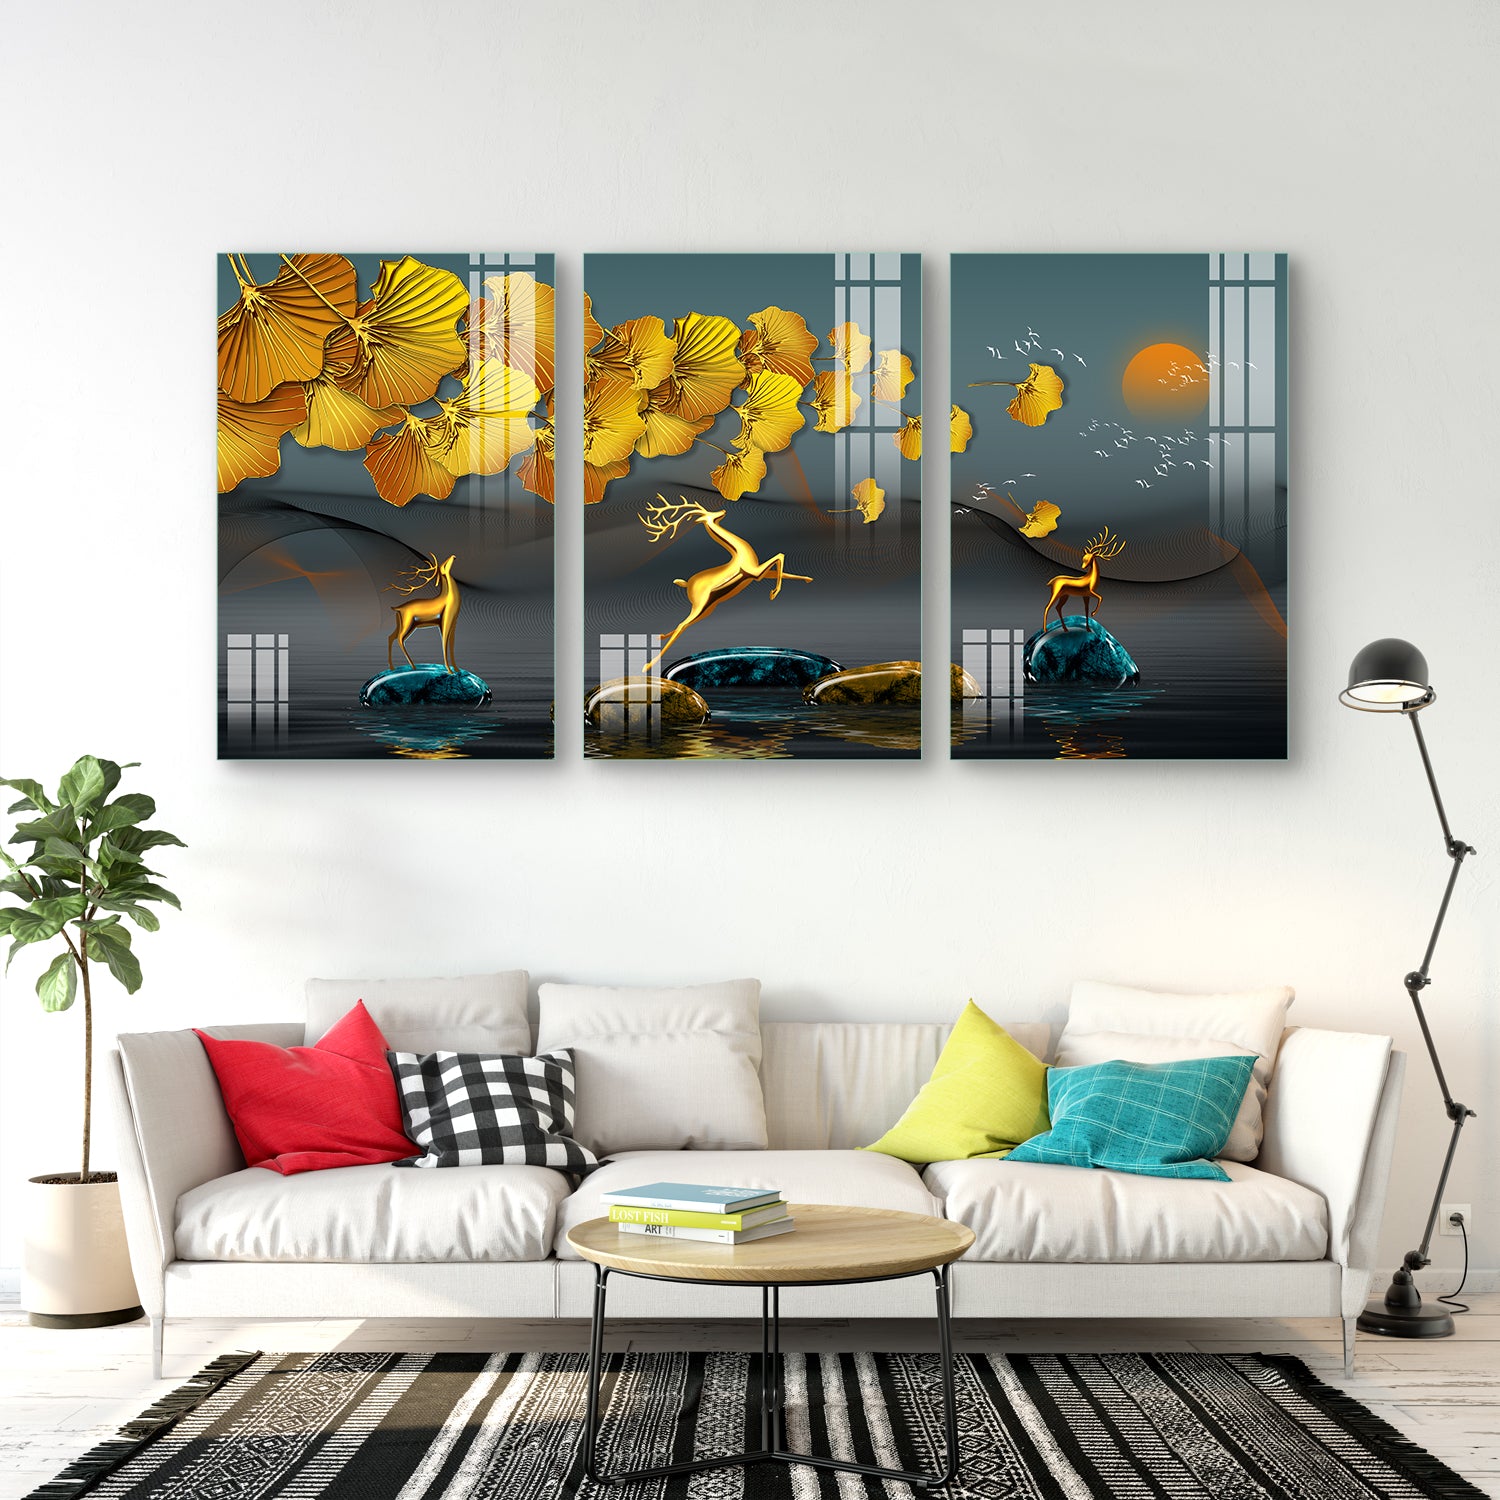 Amazon.com: Decor Art Canvas Prints Poster 5 Panels Wall Art Paintings  Paris Scenery for Bedroom Living Room Office Kitchen Home Decor Stretched  and Framed Ready to Hang: Posters & Prints